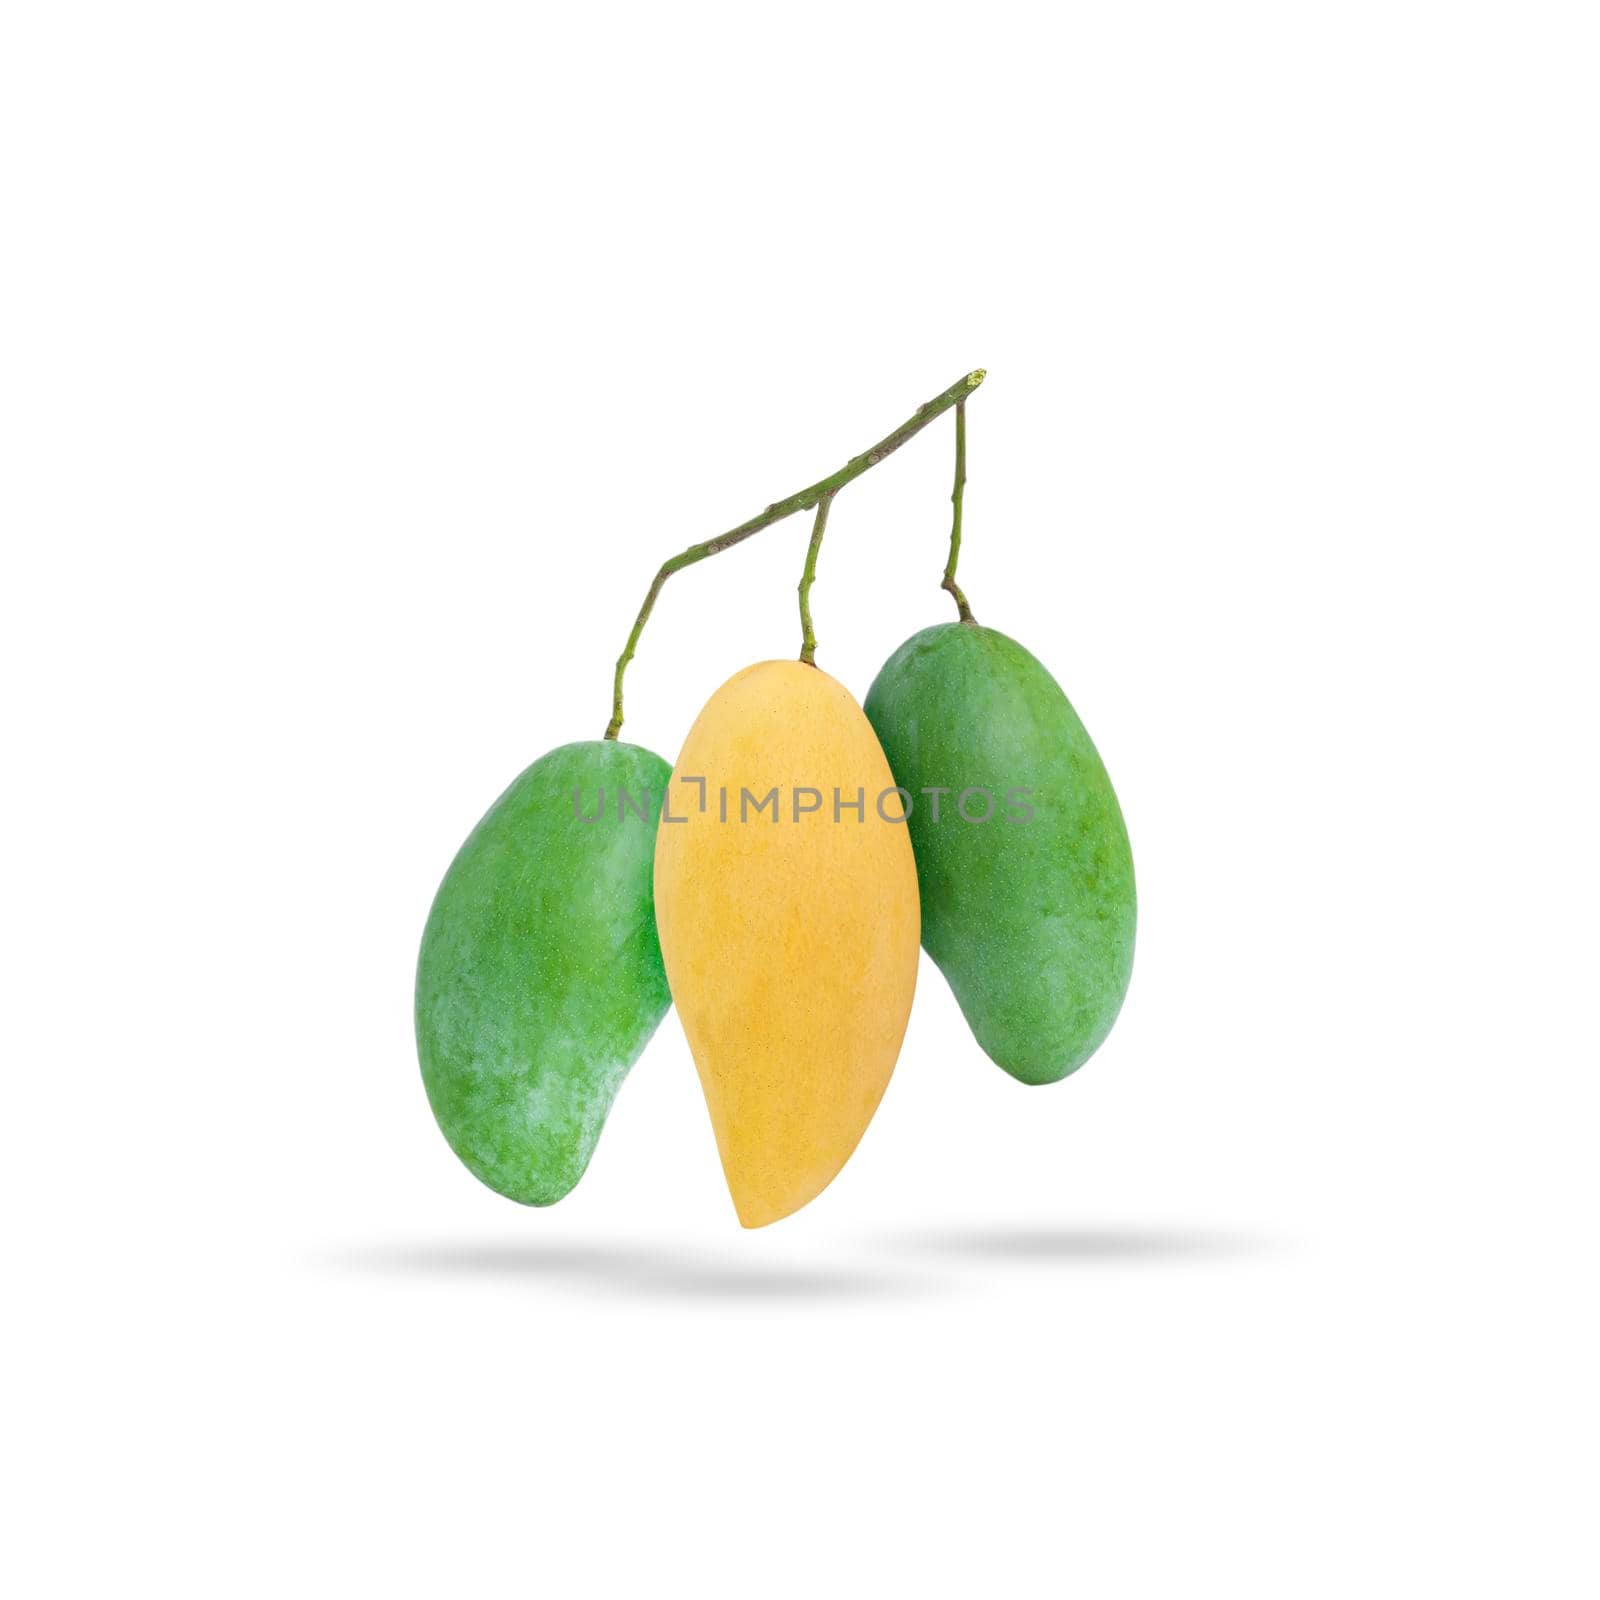 Yellow ripe mango and green raw mango in the same branch on white background